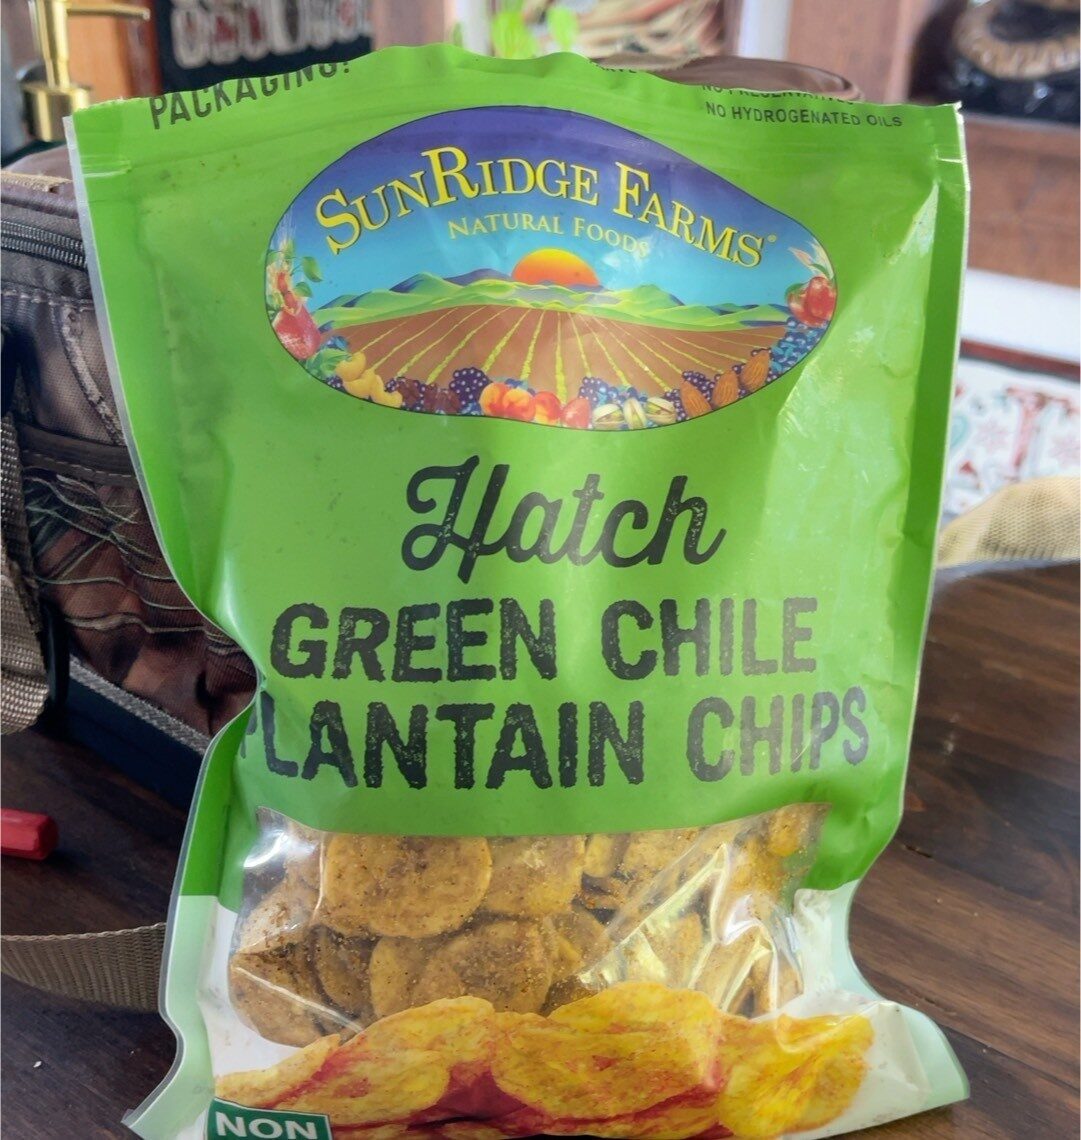 Hatch green chile plantain chips - Product